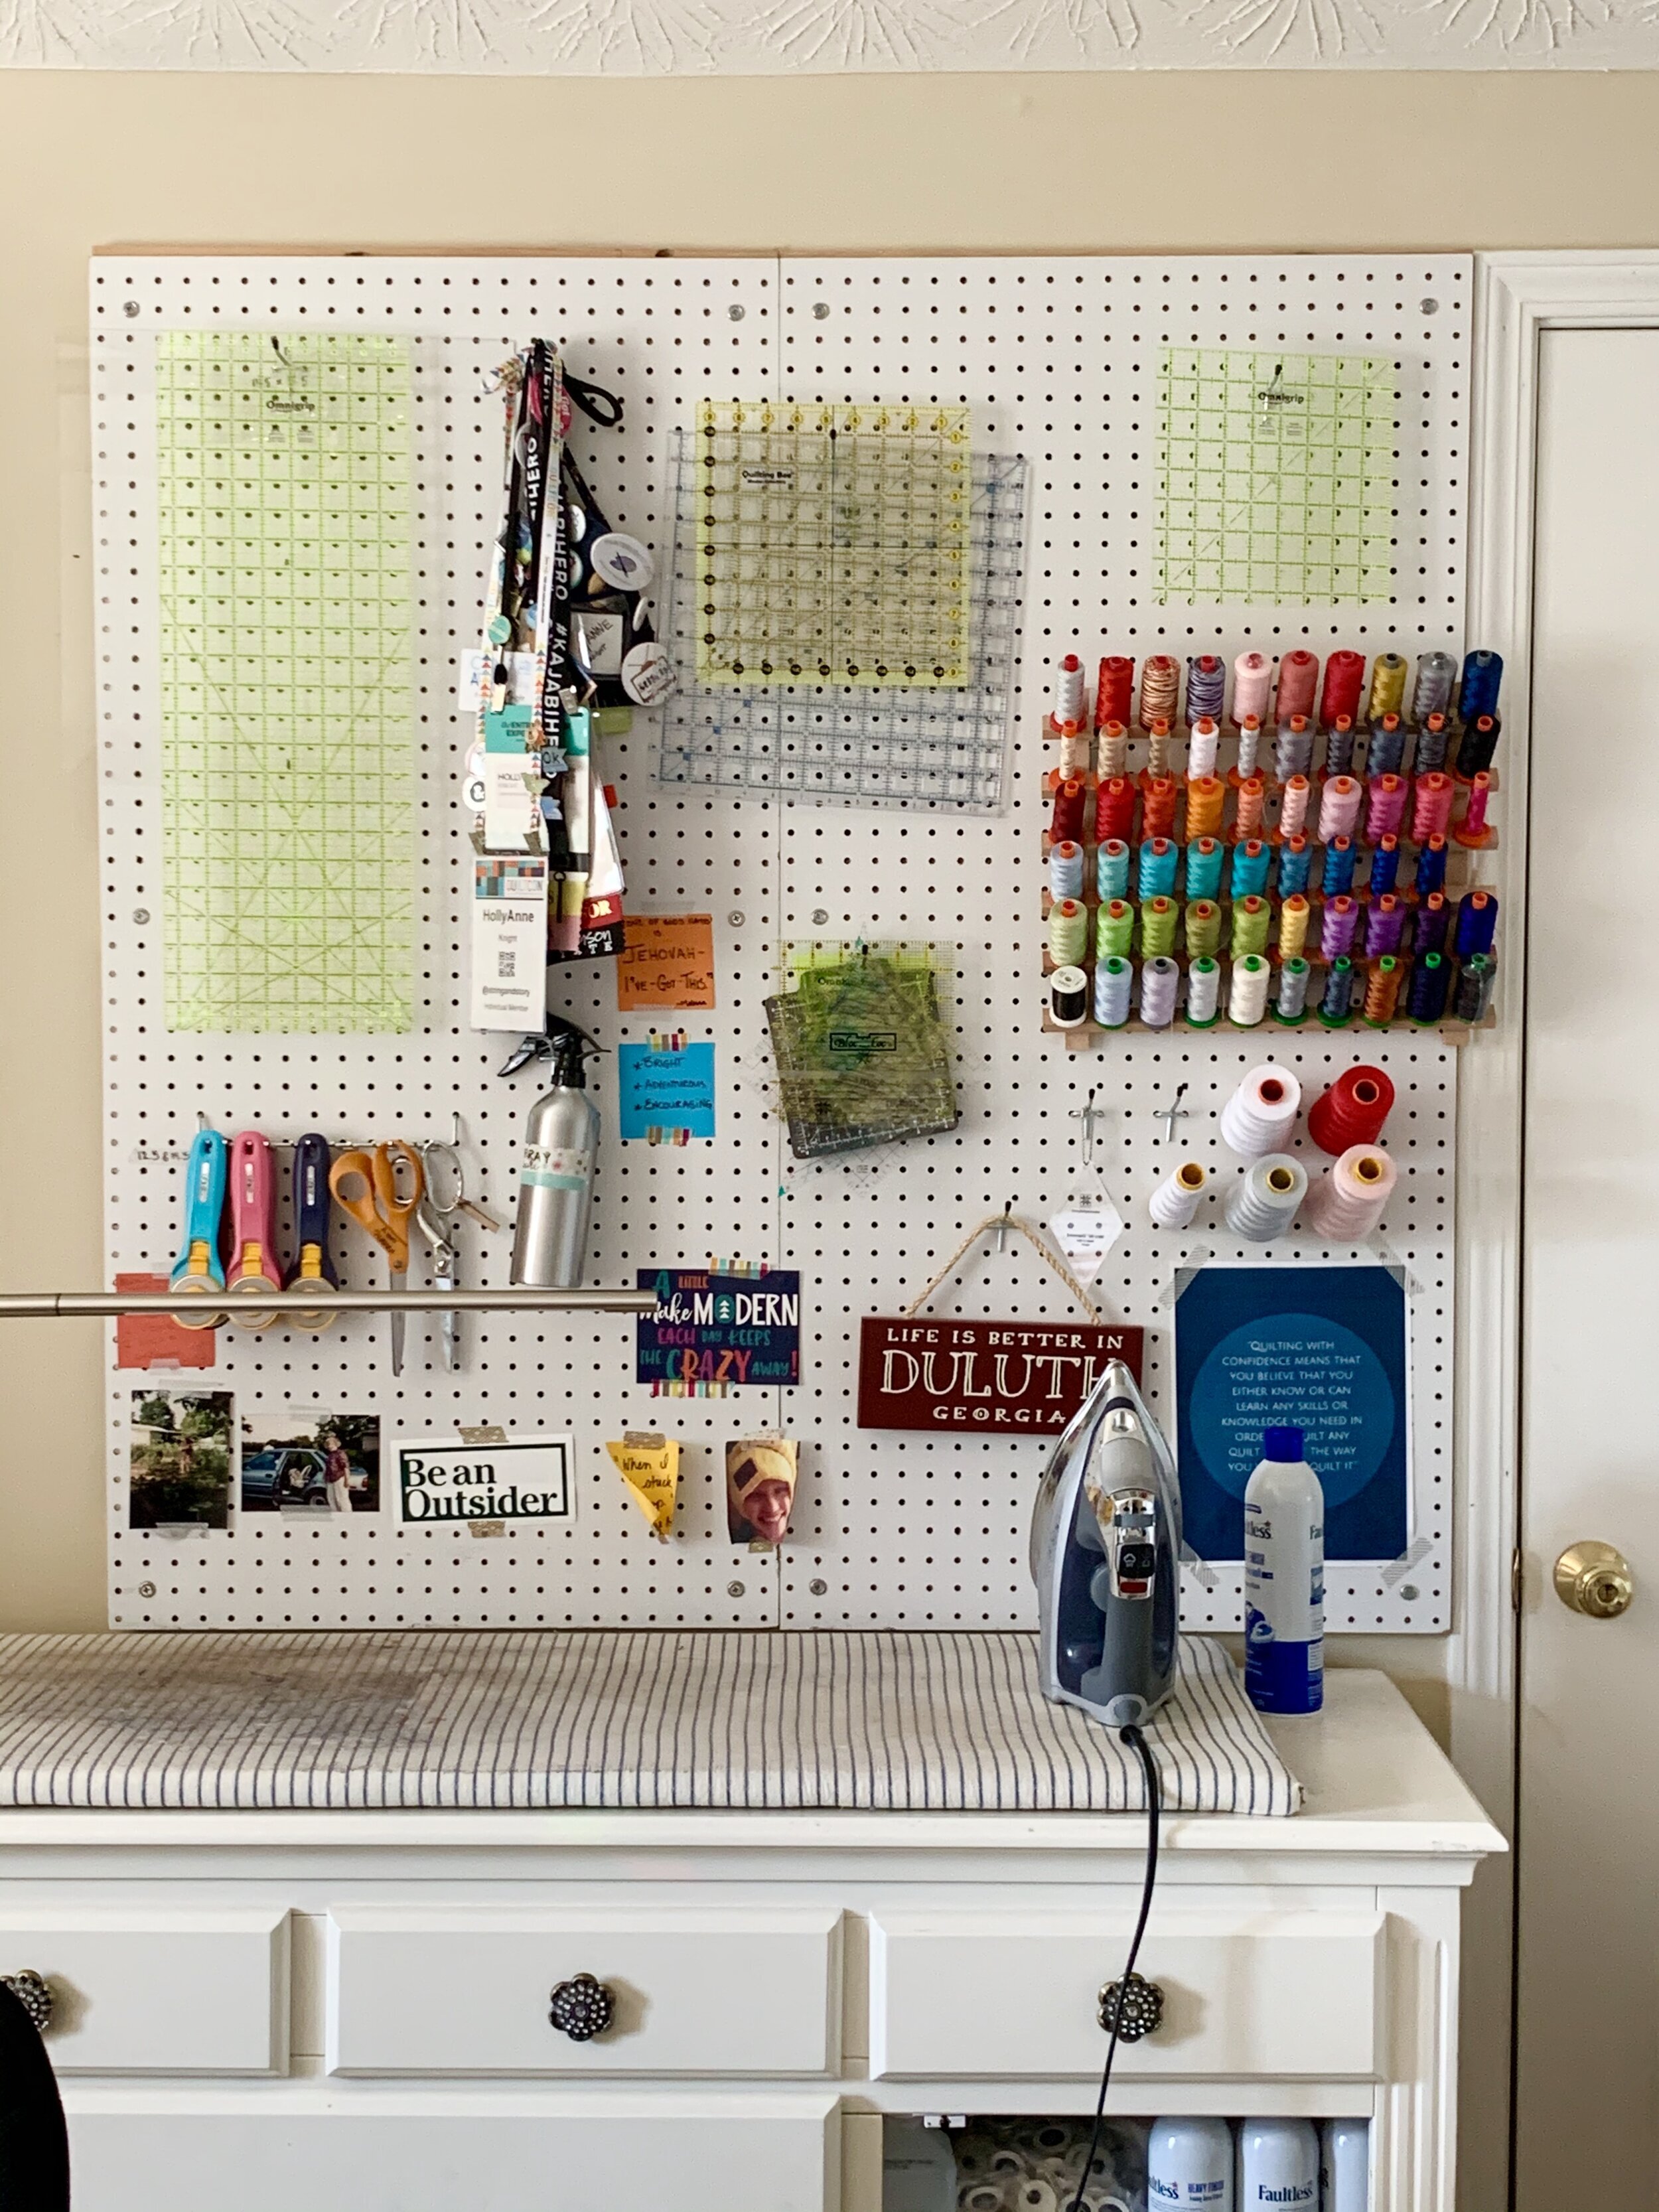 Craft and Sewing Room Storage and Organization